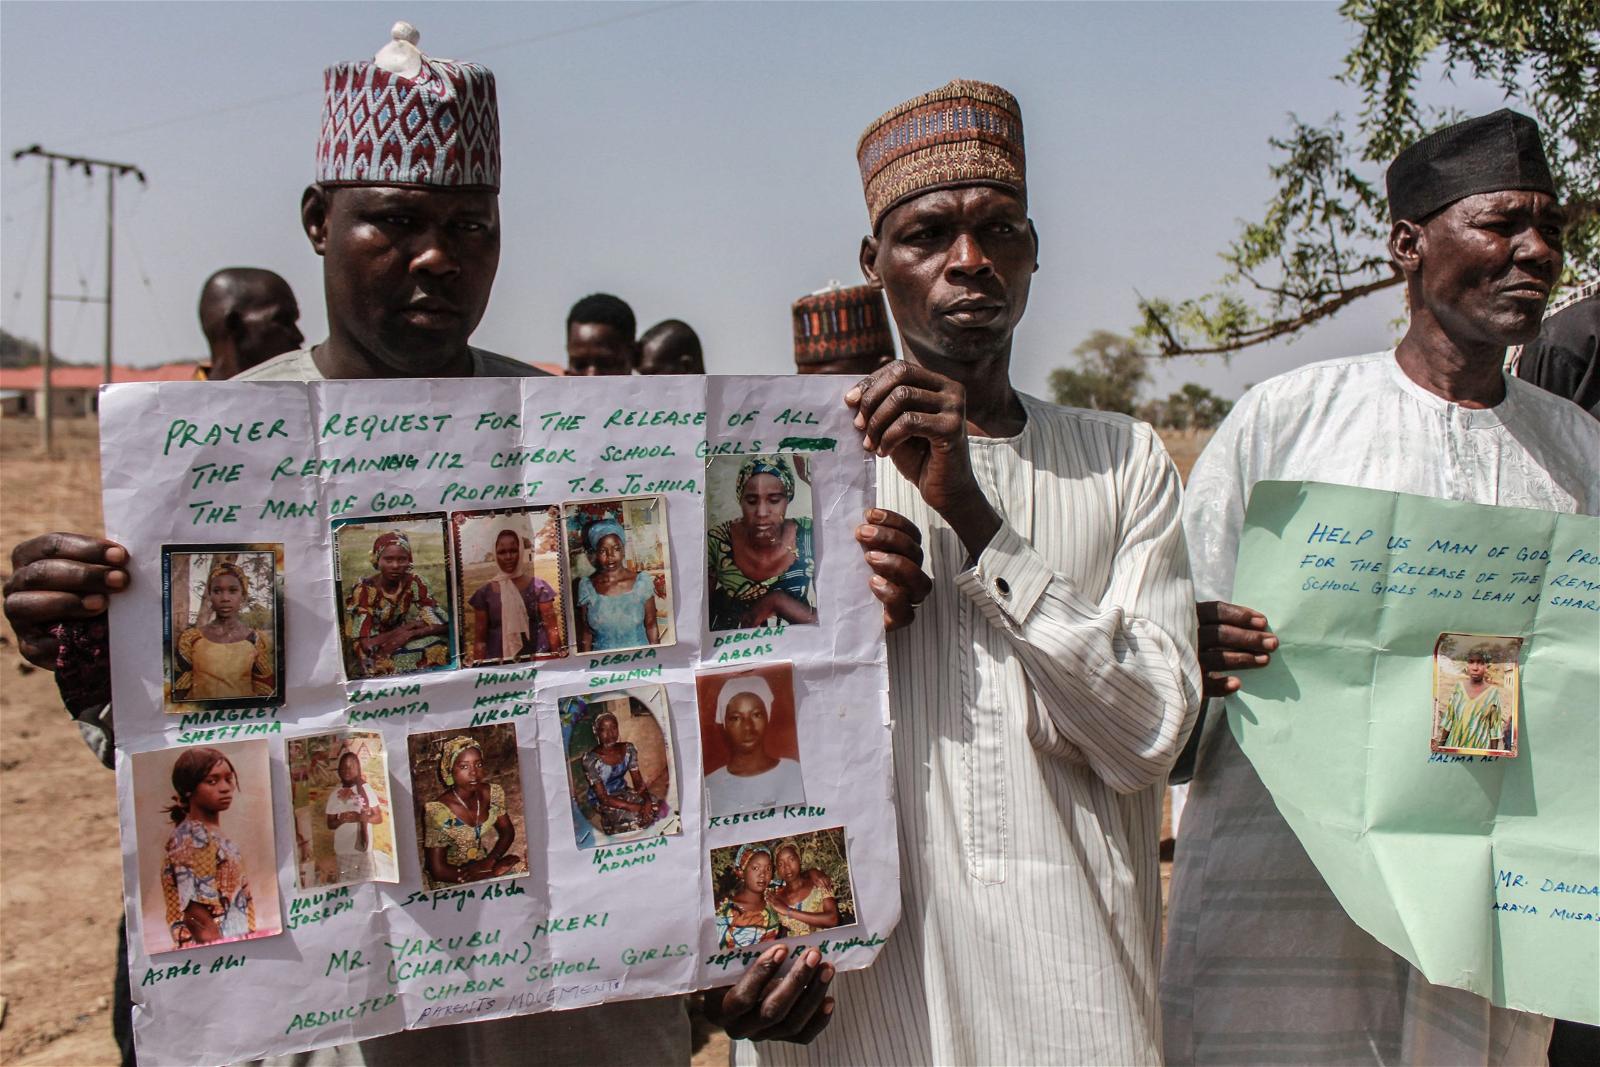 10 years after Chibok, agony of abductions plagues Nigeria - Vanguard News